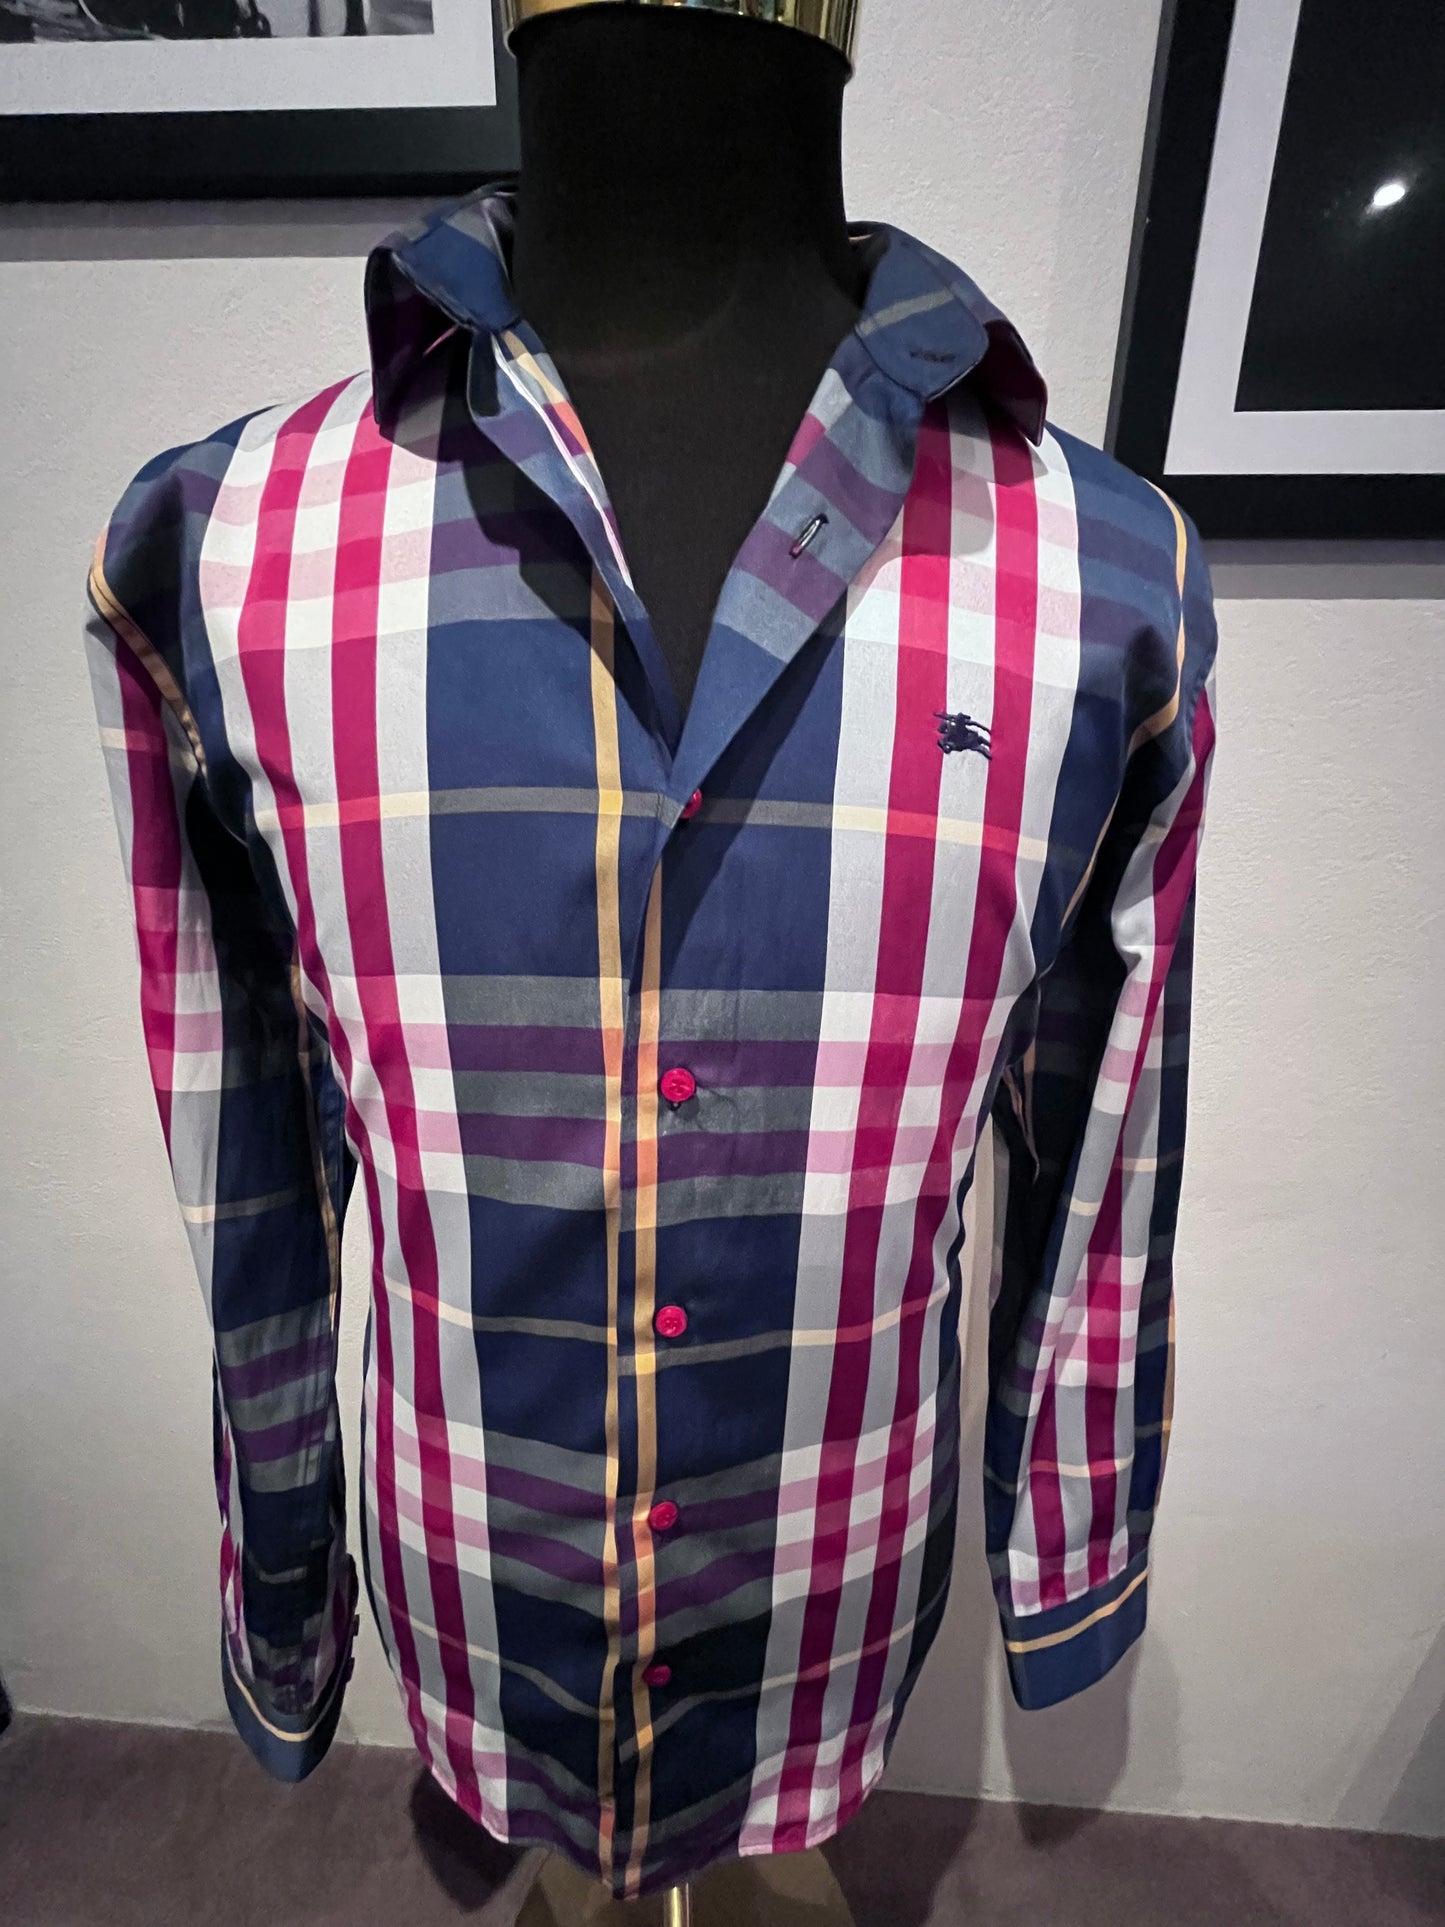 Burberry London 100% Cotton Red Blue Check Shirt Size XL Slim Fit Made in GB fits more like a Large